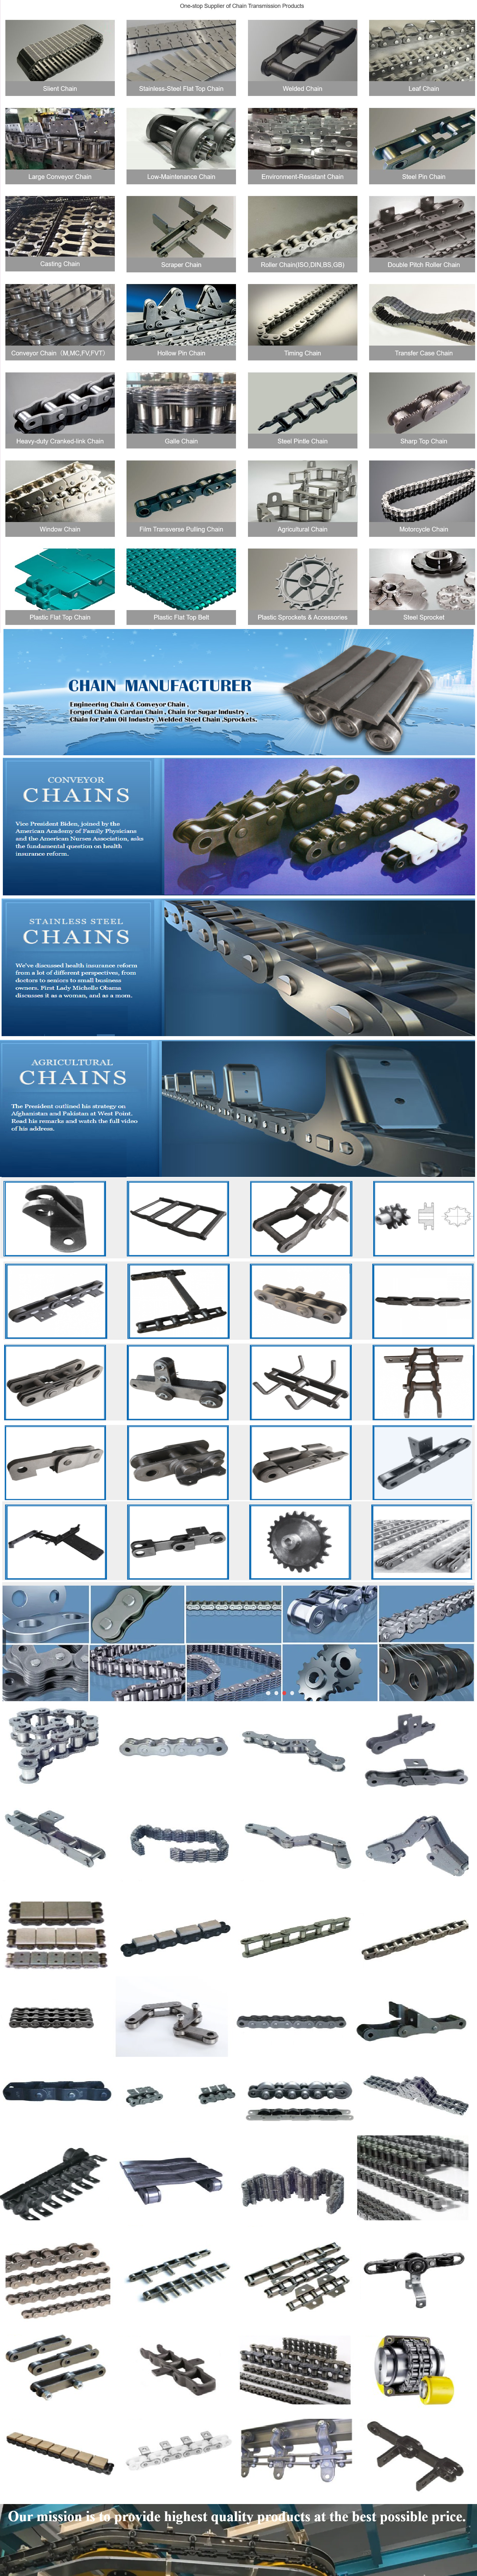 Industrial  made in China - replacement parts -  in Aracaju Brazil  Conveyor Large Roller Chain Steel professional Chain Factory Supply with ce certificate top quality low price